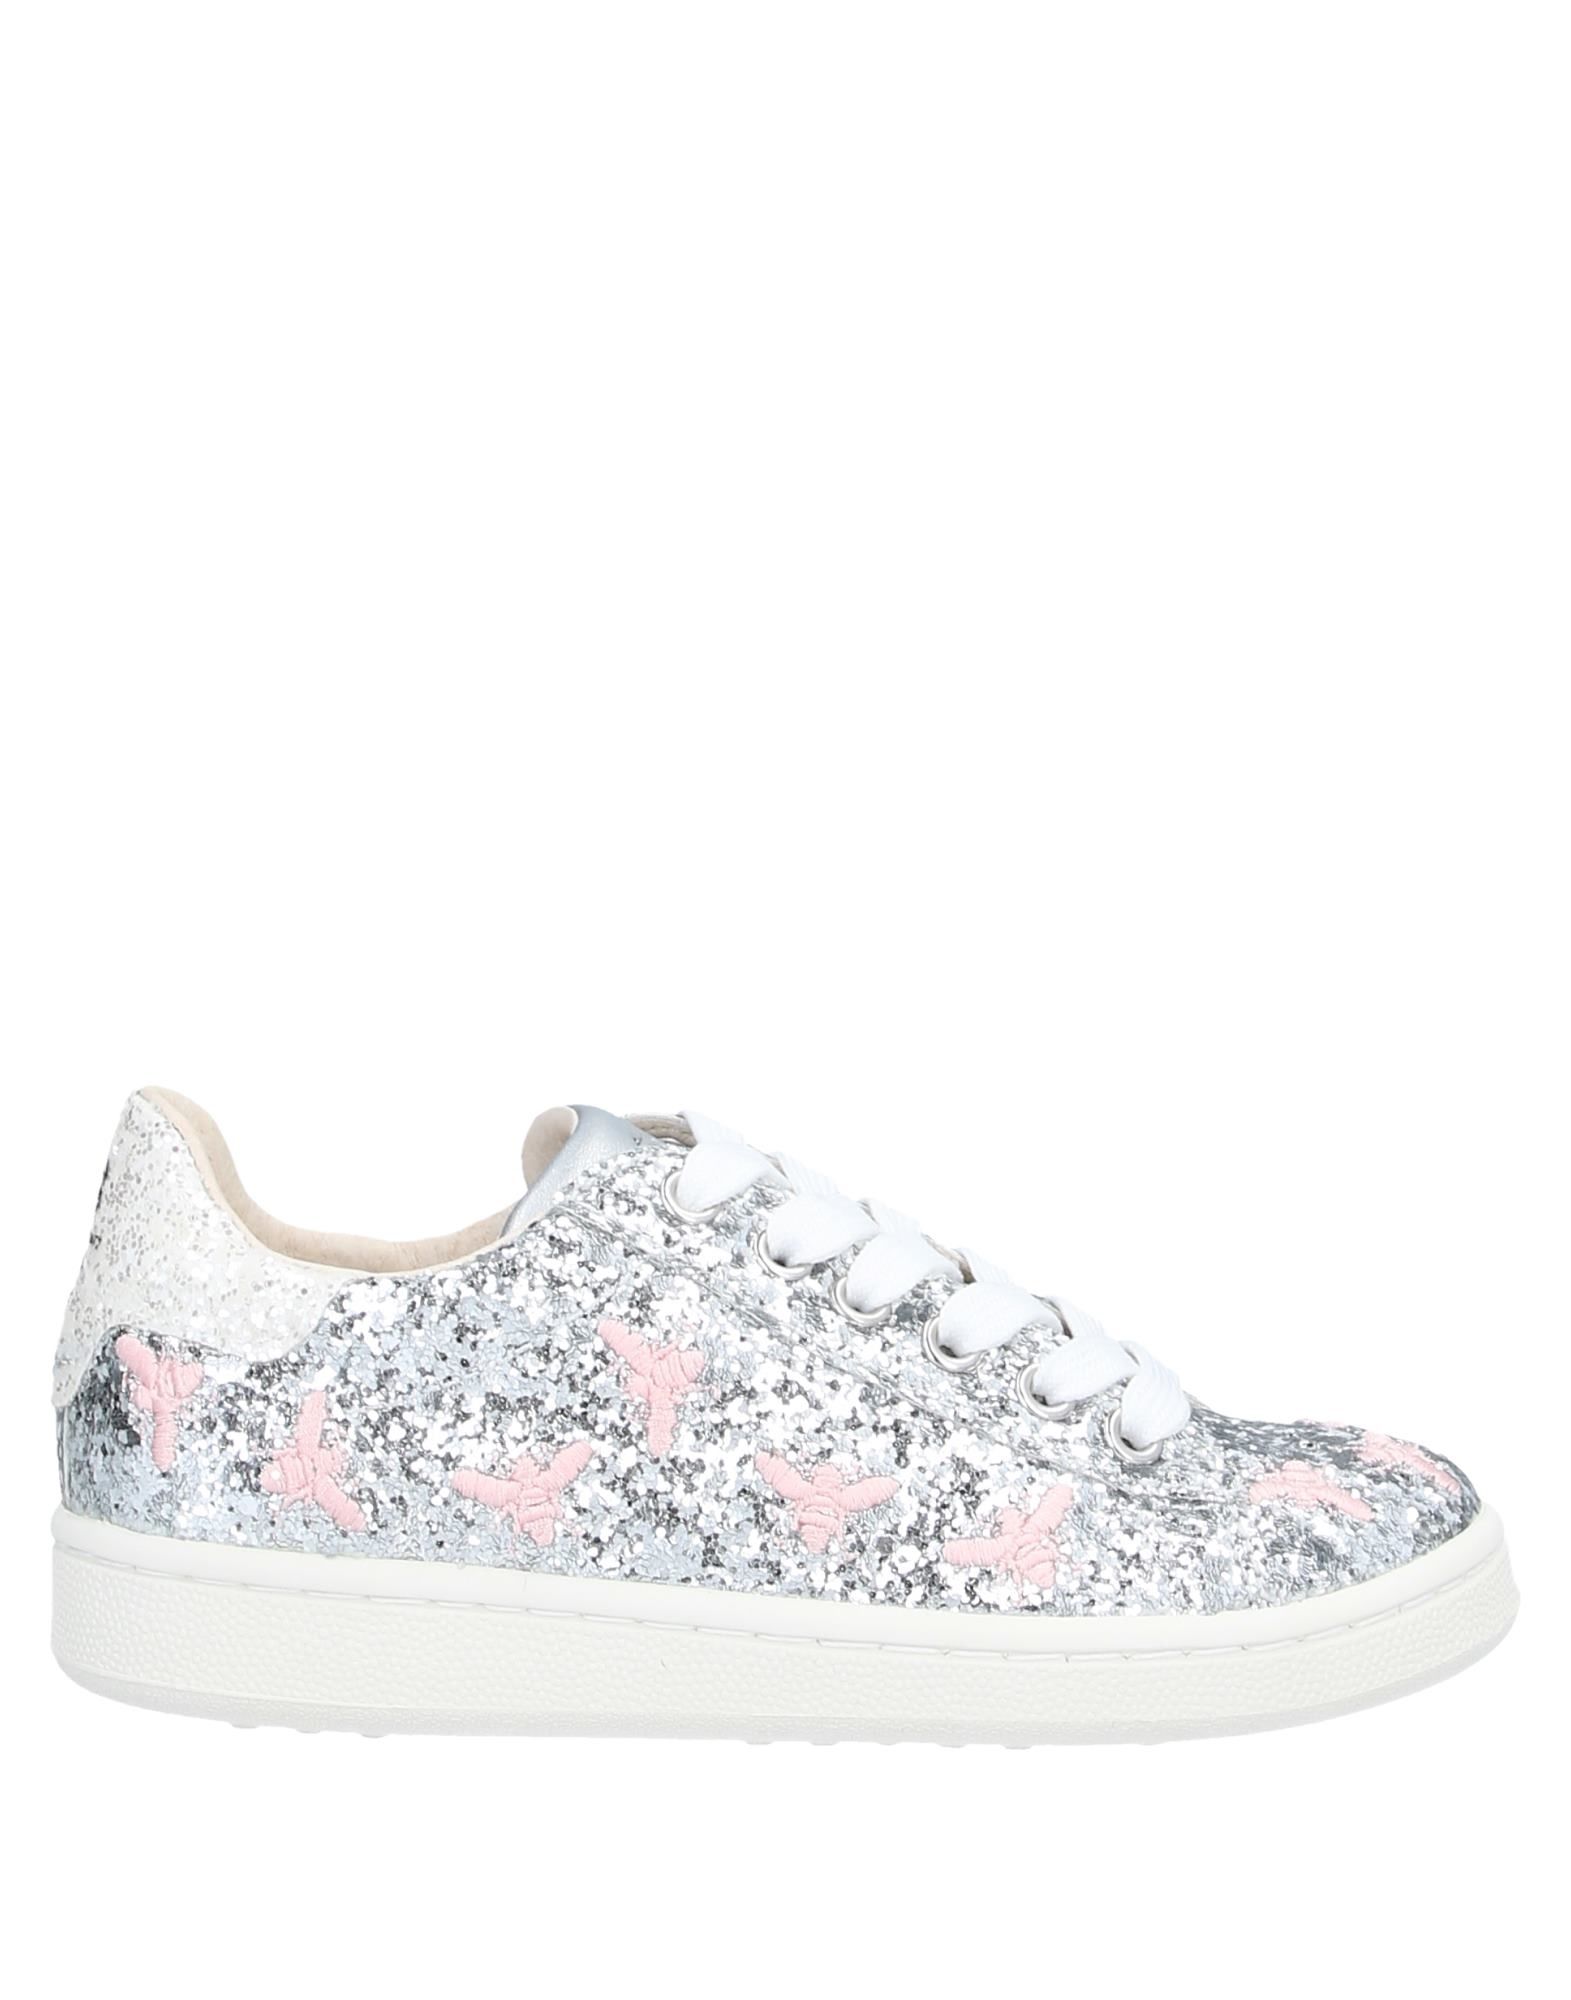 MOACONCEPT Sneakers Kinder Silber von MOACONCEPT